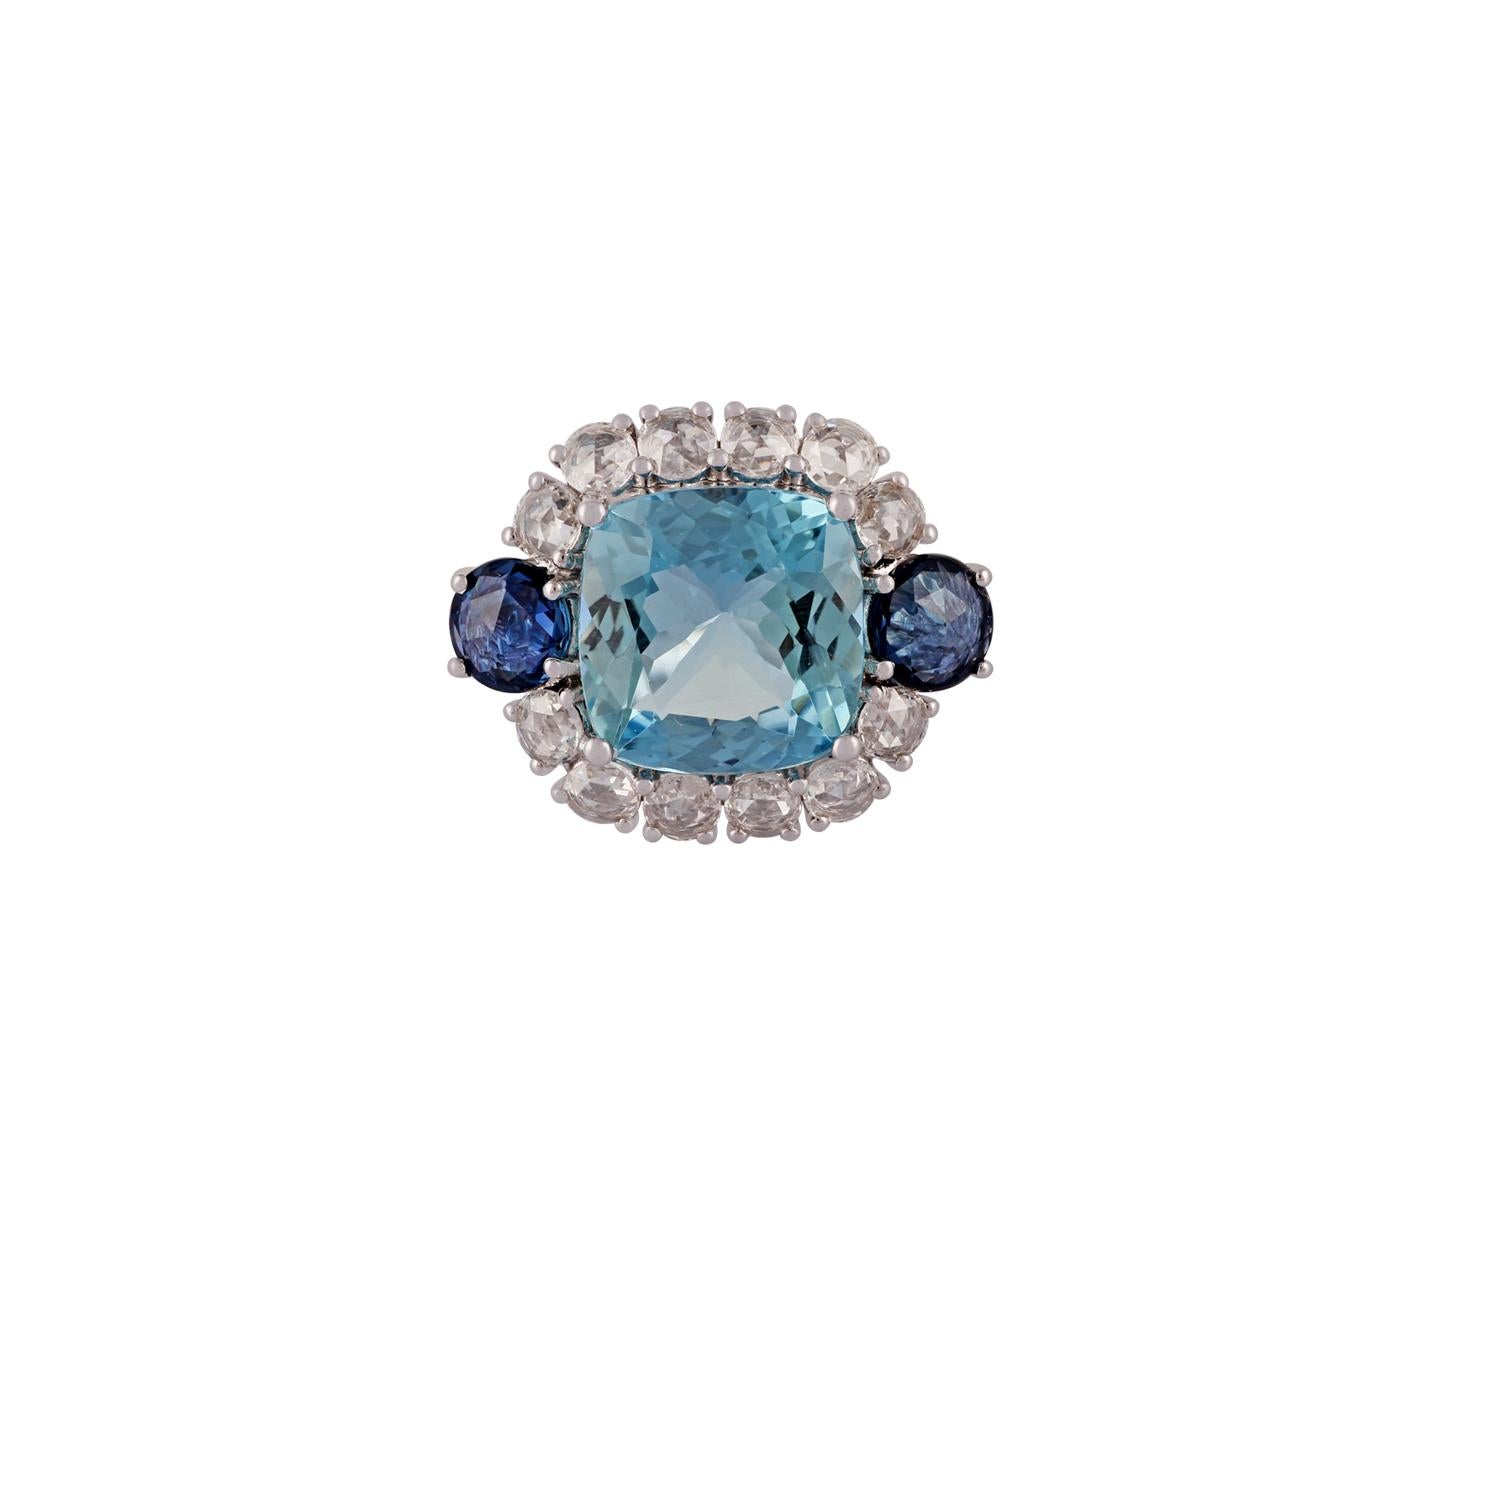 This is an exclusive aquamarine, blue sapphire & diamond ring studded in 18k white gold features 1 piece of cushion shaped aquamarine weight 4.42 carats with 2 pieces of round shaped rose cut blue sapphires on two sides weight 1.16 carats &